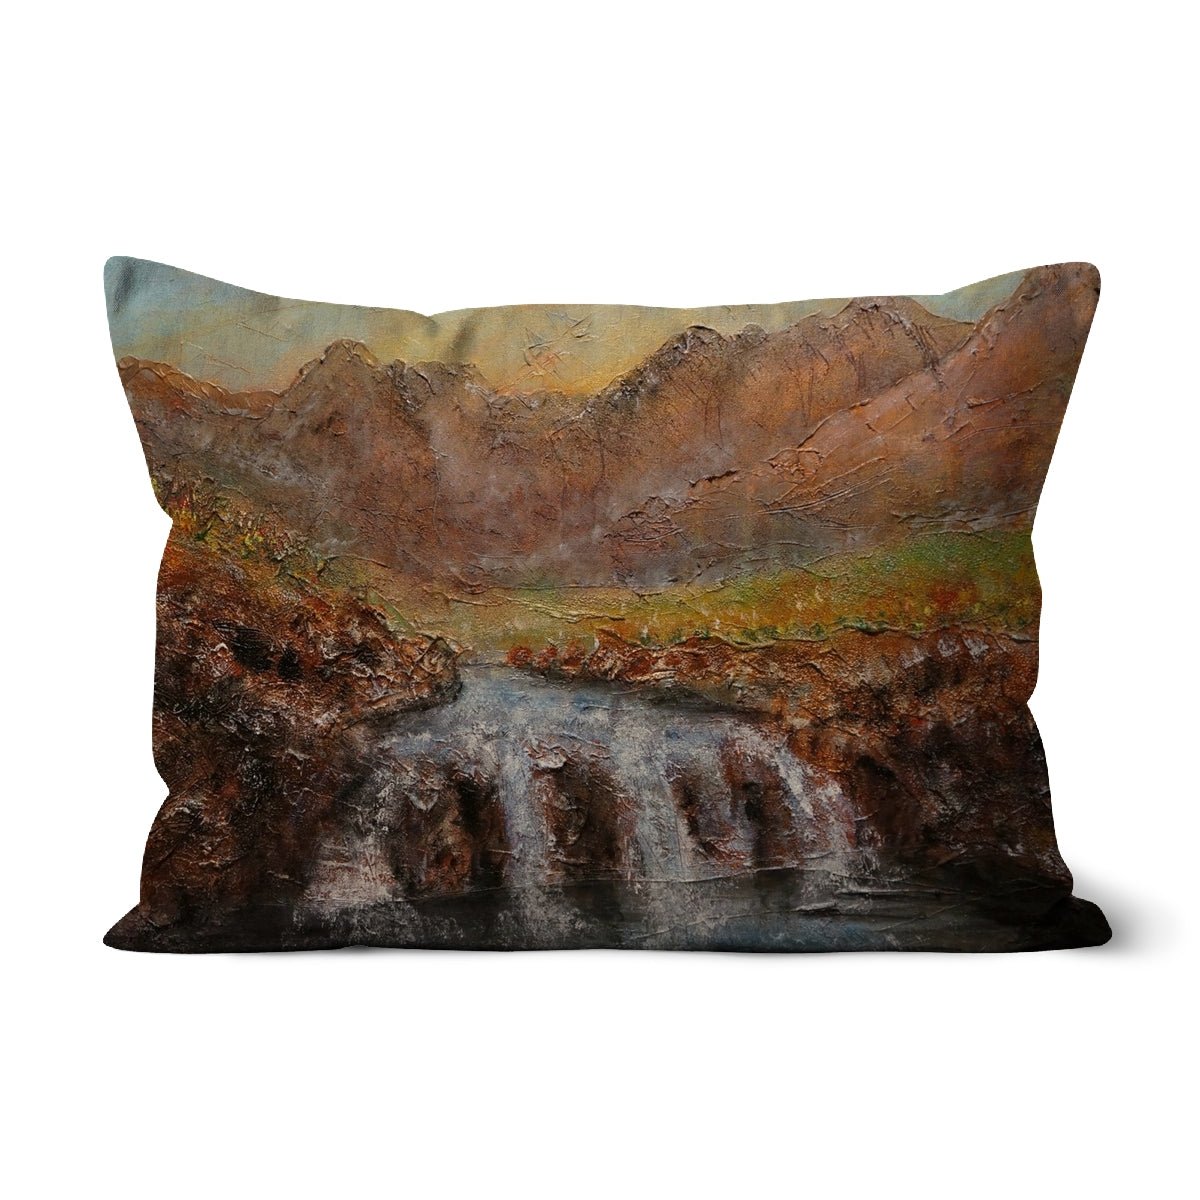 Fairy Pools Dawn Skye Art Gifts Cushion-Cushions-Skye Art Gallery-Faux Suede-19"x13"-Paintings, Prints, Homeware, Art Gifts From Scotland By Scottish Artist Kevin Hunter